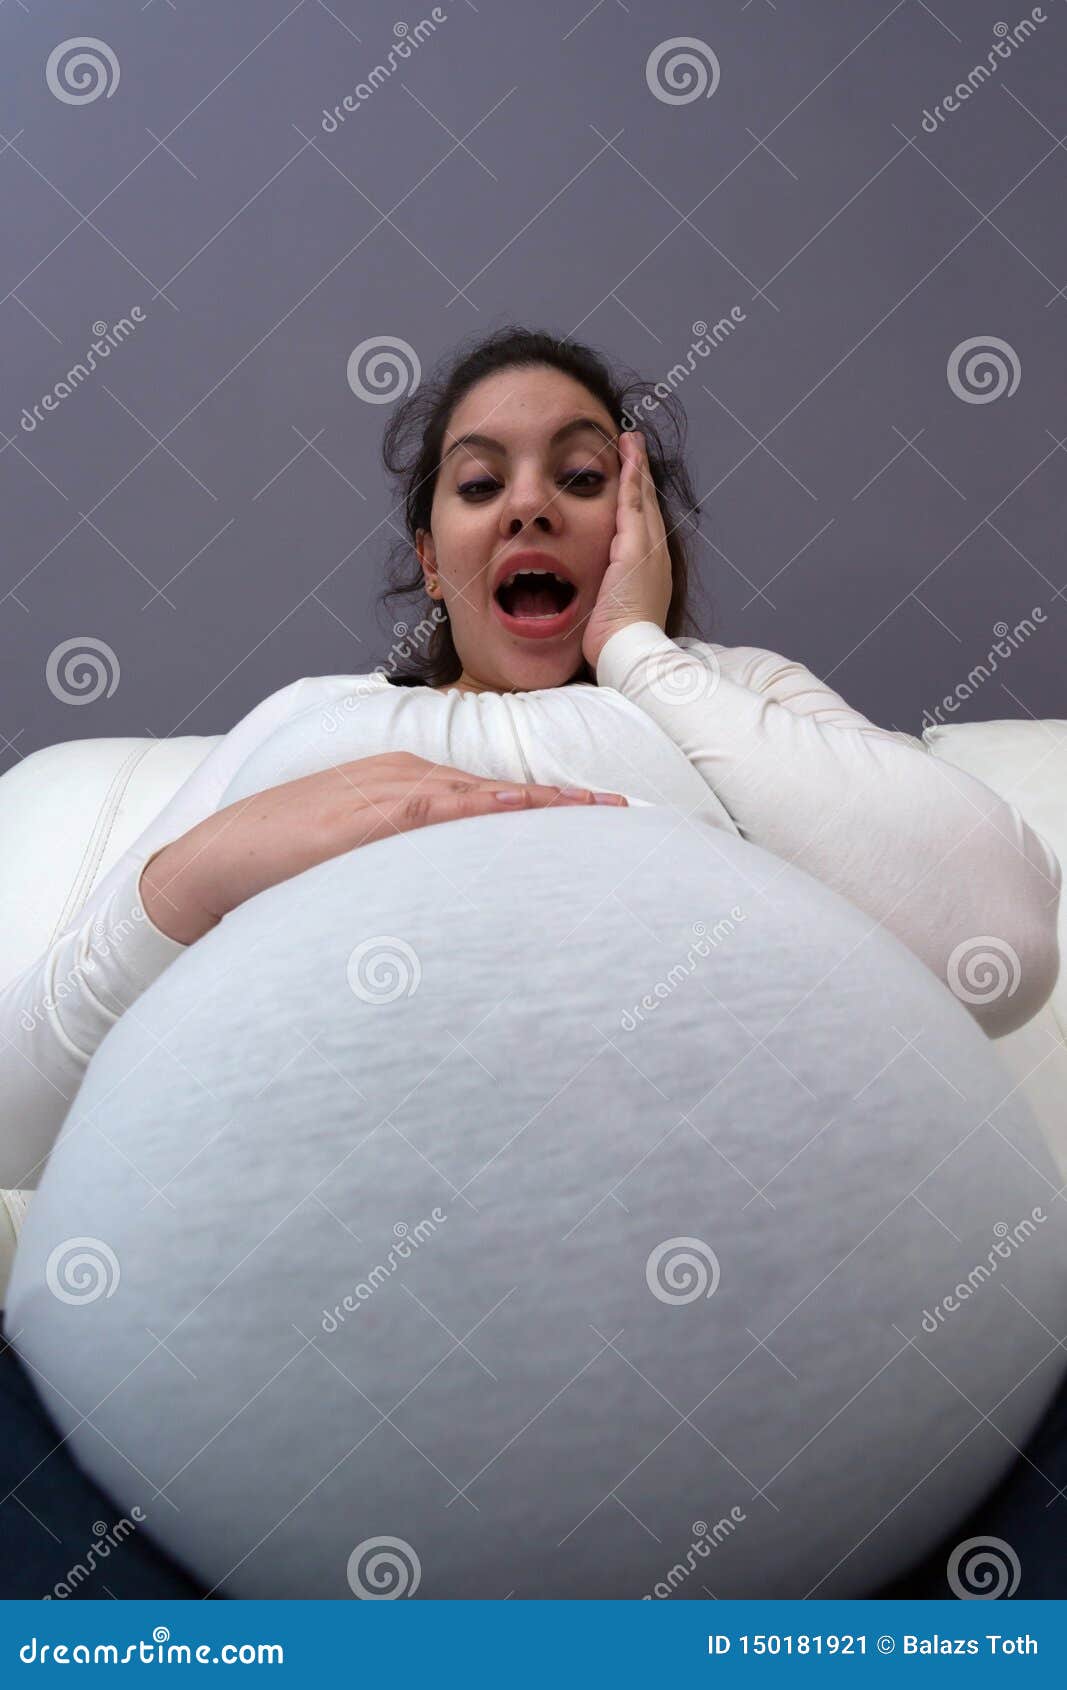 Extreme Angle View Of Pregnant Momâ€™s Giant Baby Bump Stock Image